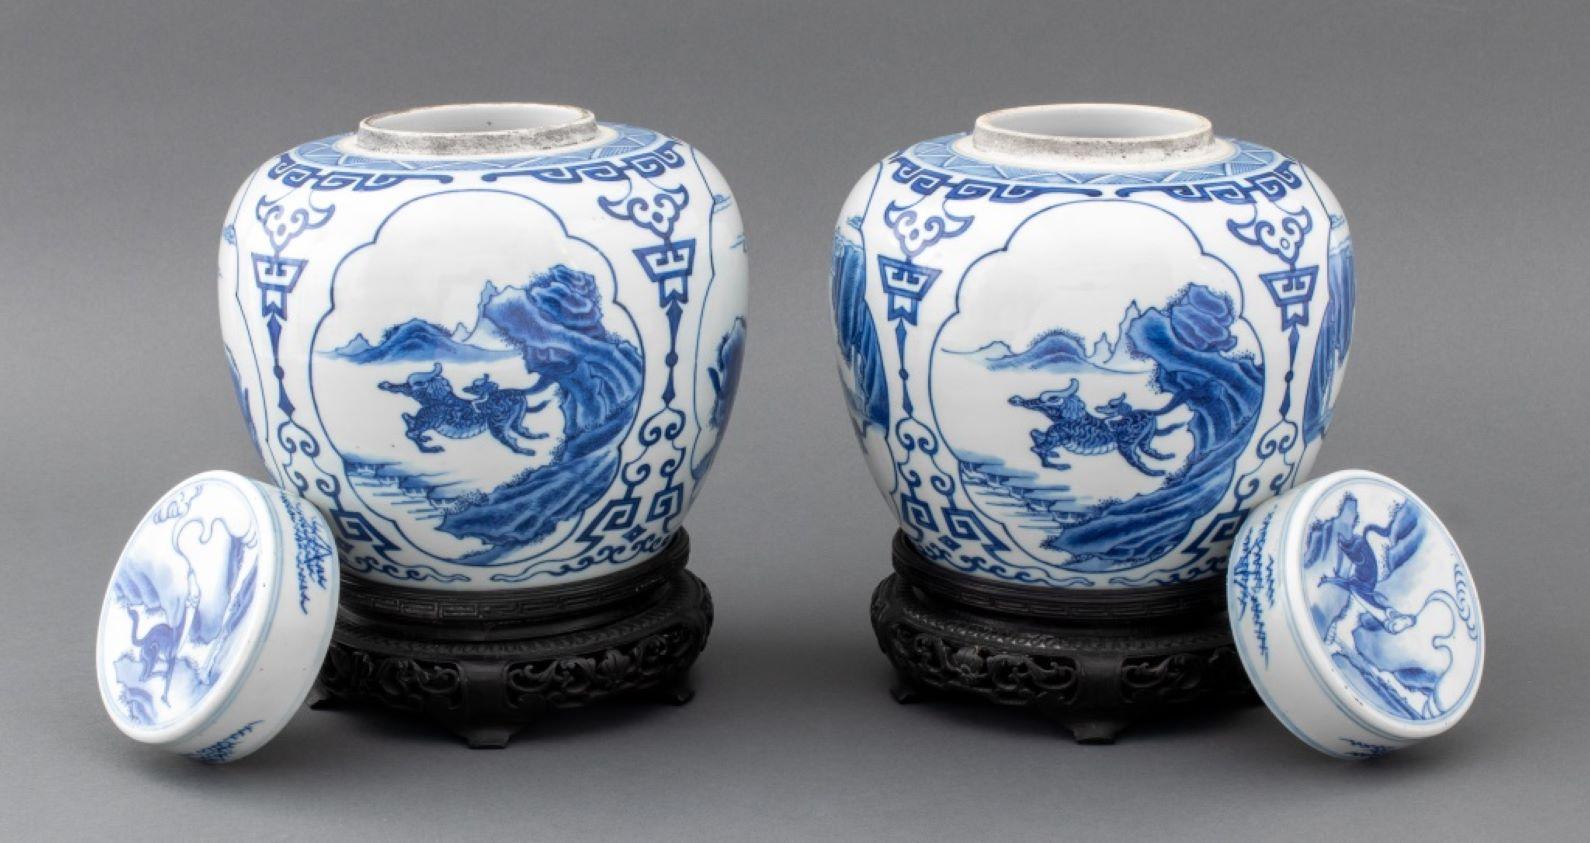 Pair of Chinese Blue and White Porcelain Lidded Ginger Jars, with mystical creature motif, cobalt blue overglaze Kangxi six character mark in double circle to underside, on carved wood stands. Overall: 10.25